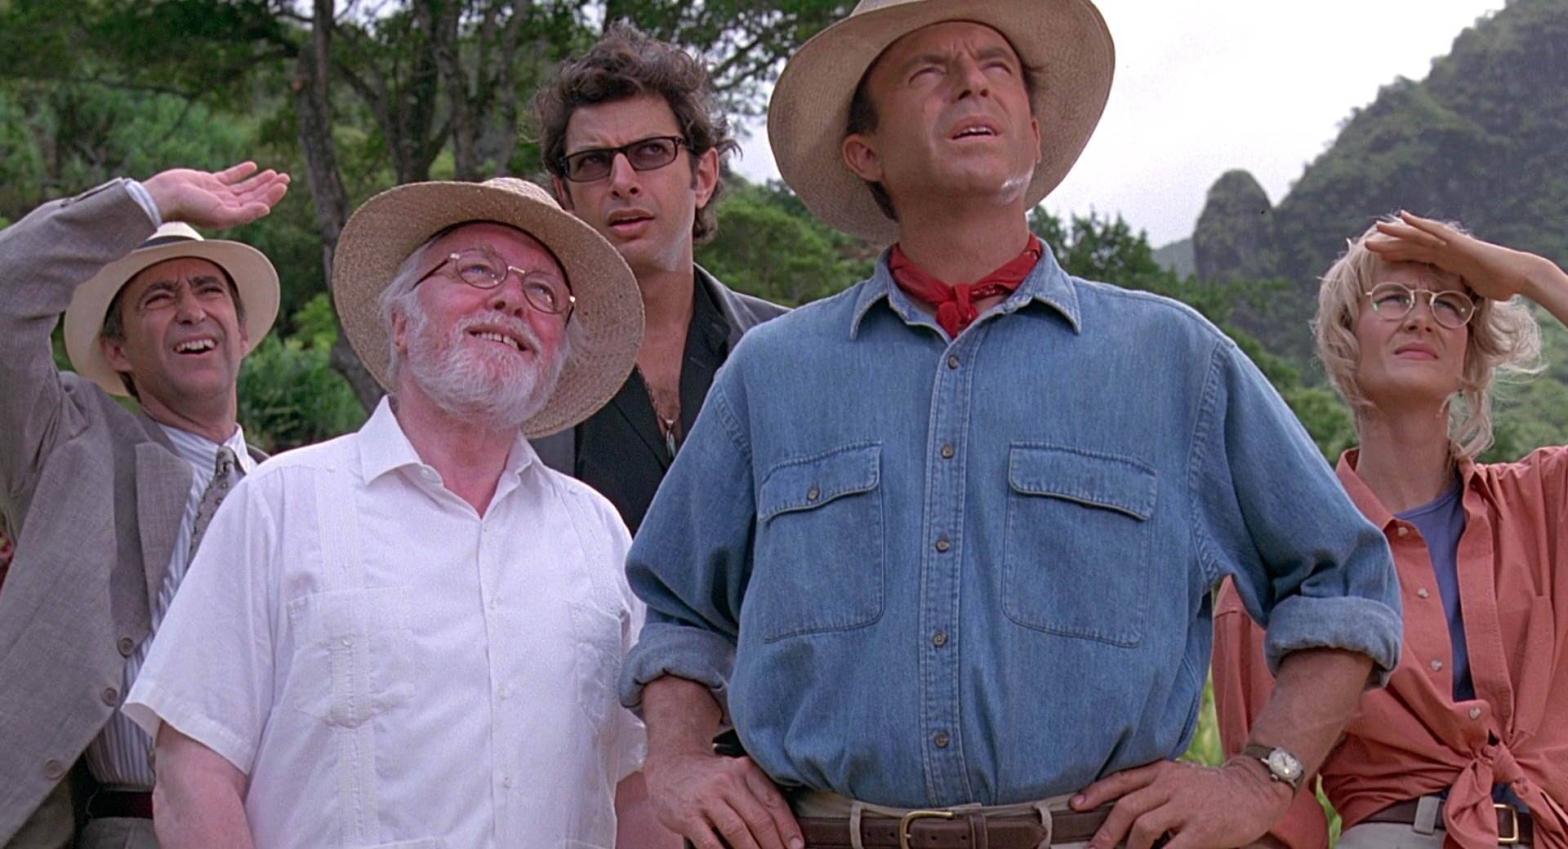 Original Jurassic Park cast members are returning for Dominion but will have their own story. (Photo: Universal)